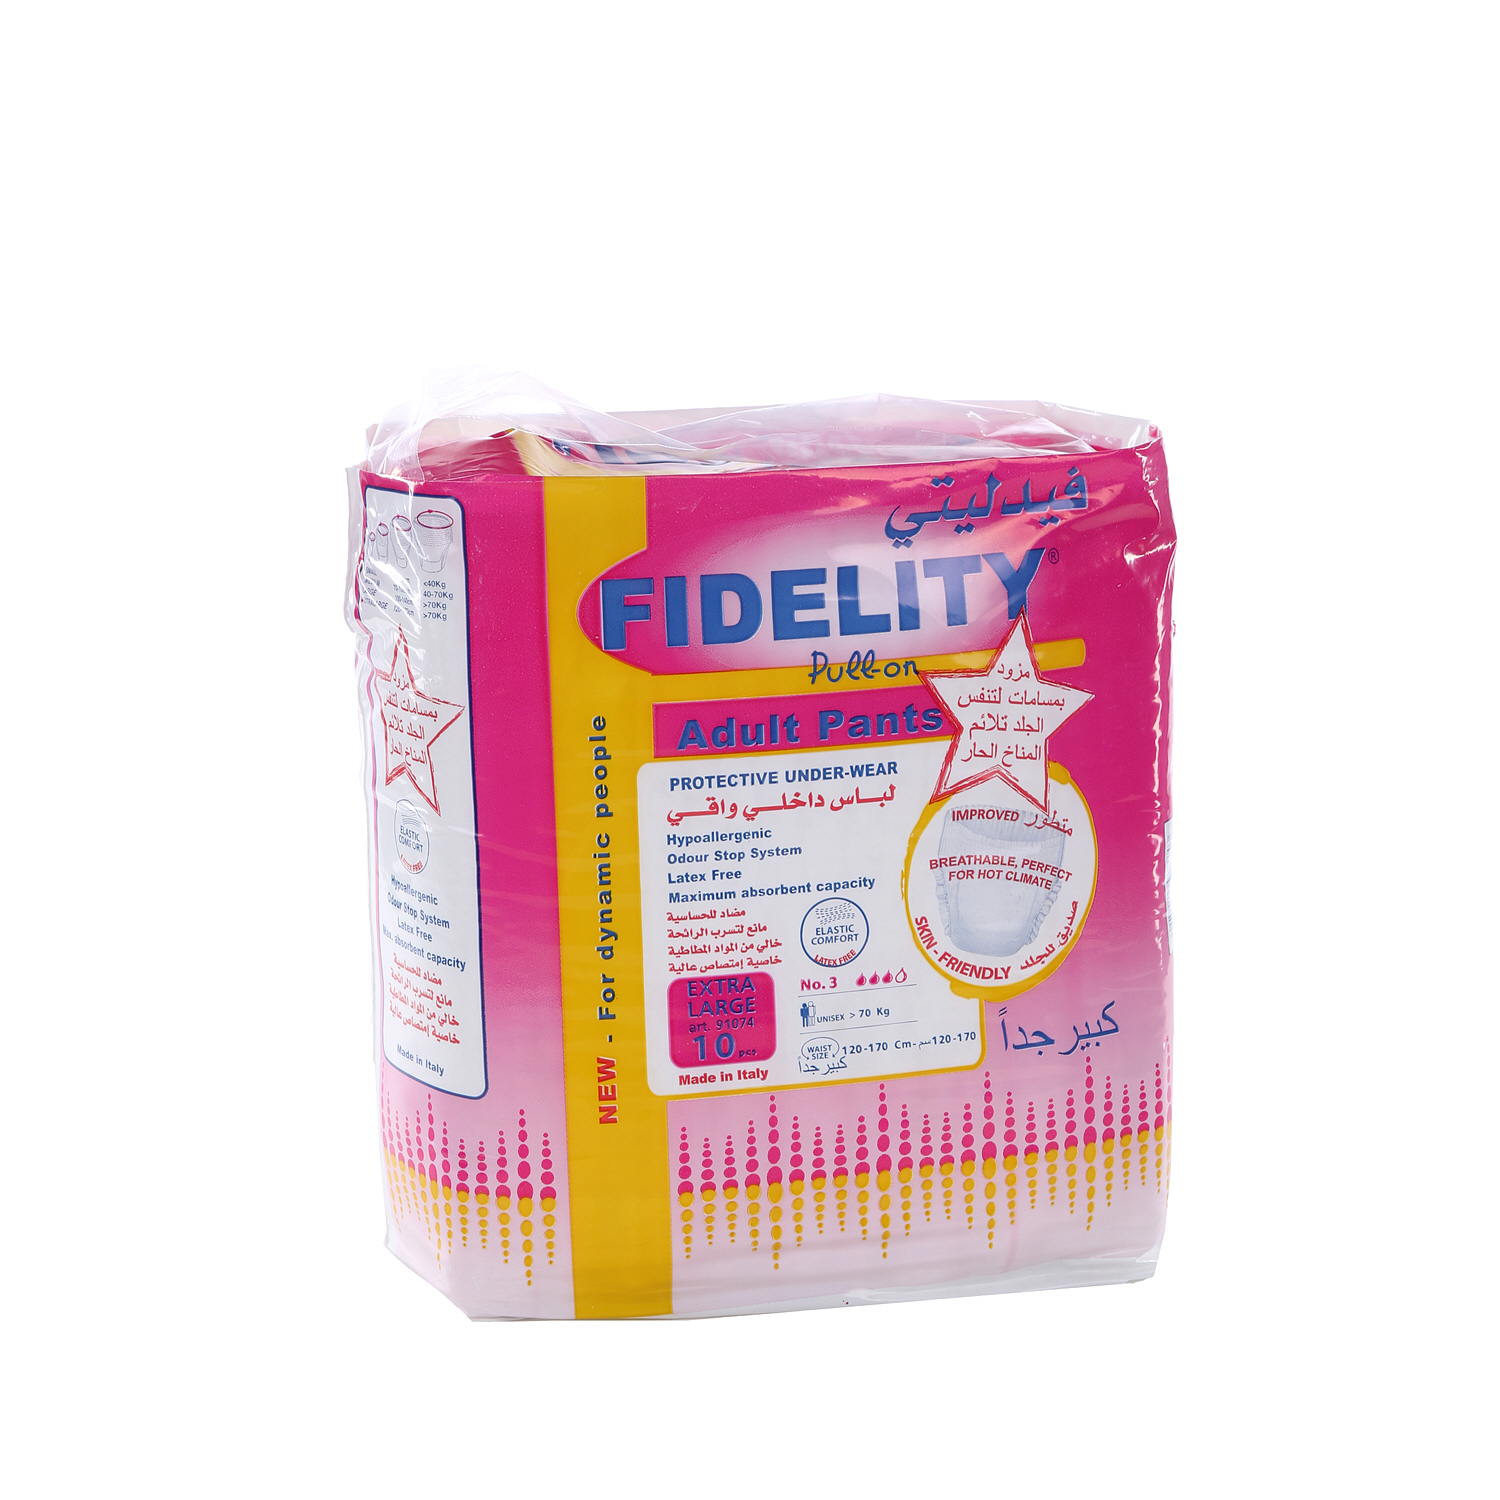 Fidelity Adult Pull On Pants Extra Large 10 Diapers